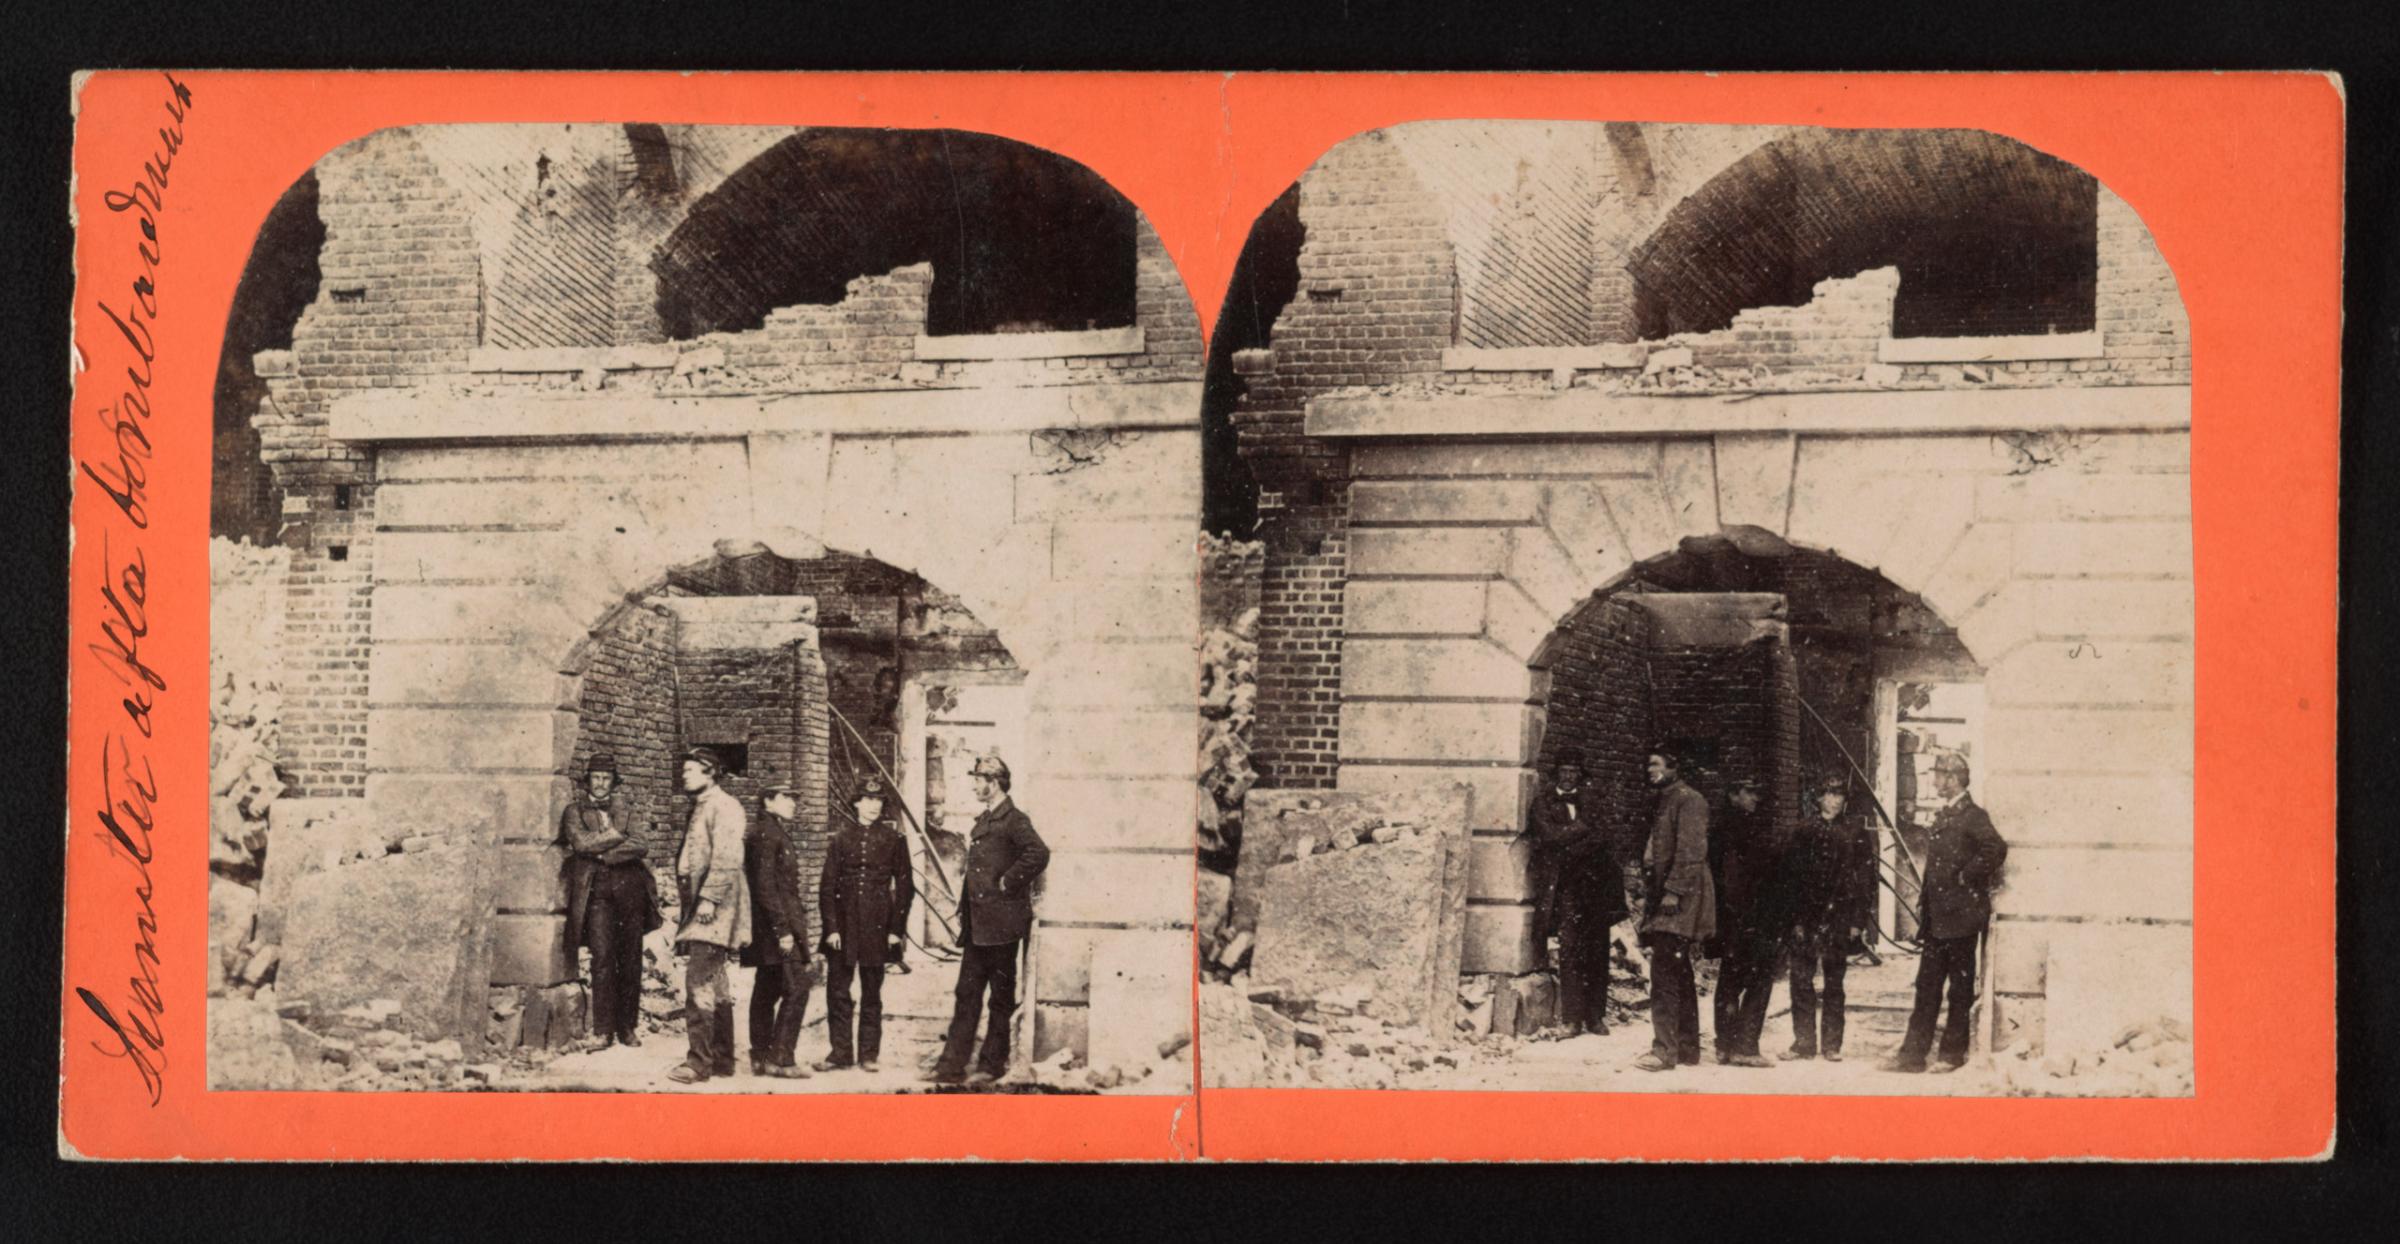 Civil War Stereograph from the Library of Congress